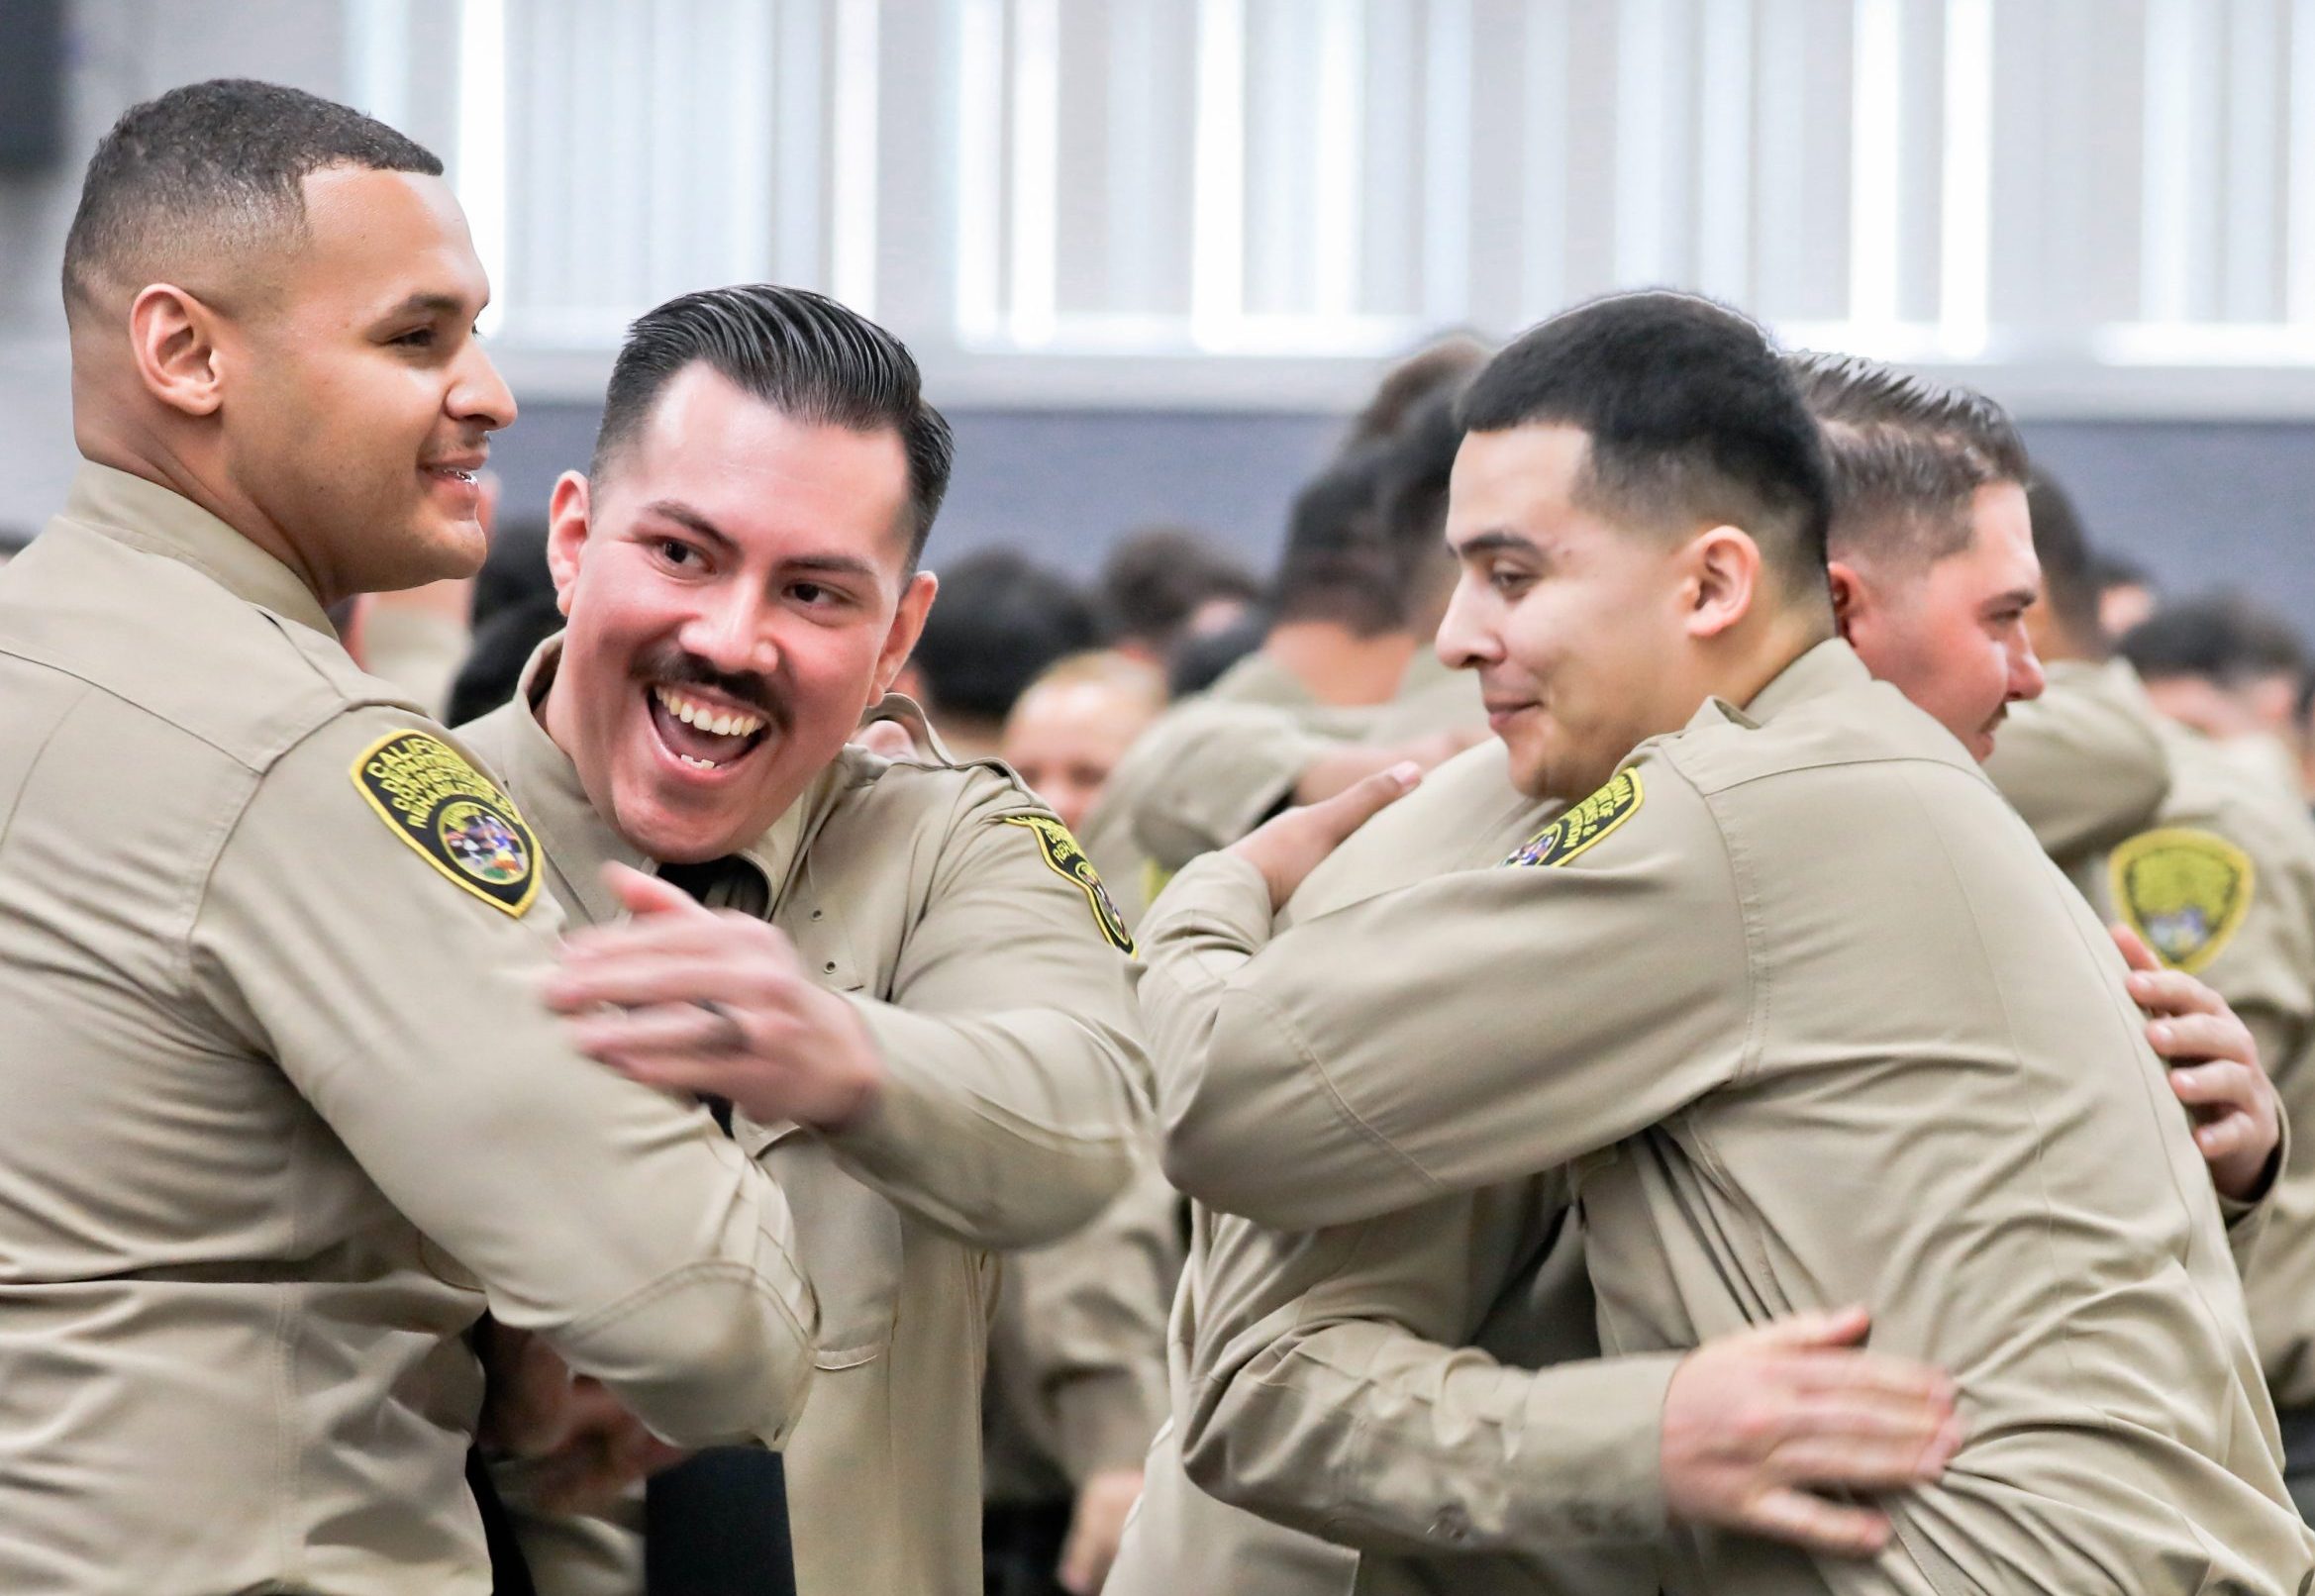 New sworn correctional officers celebrate their graduation.